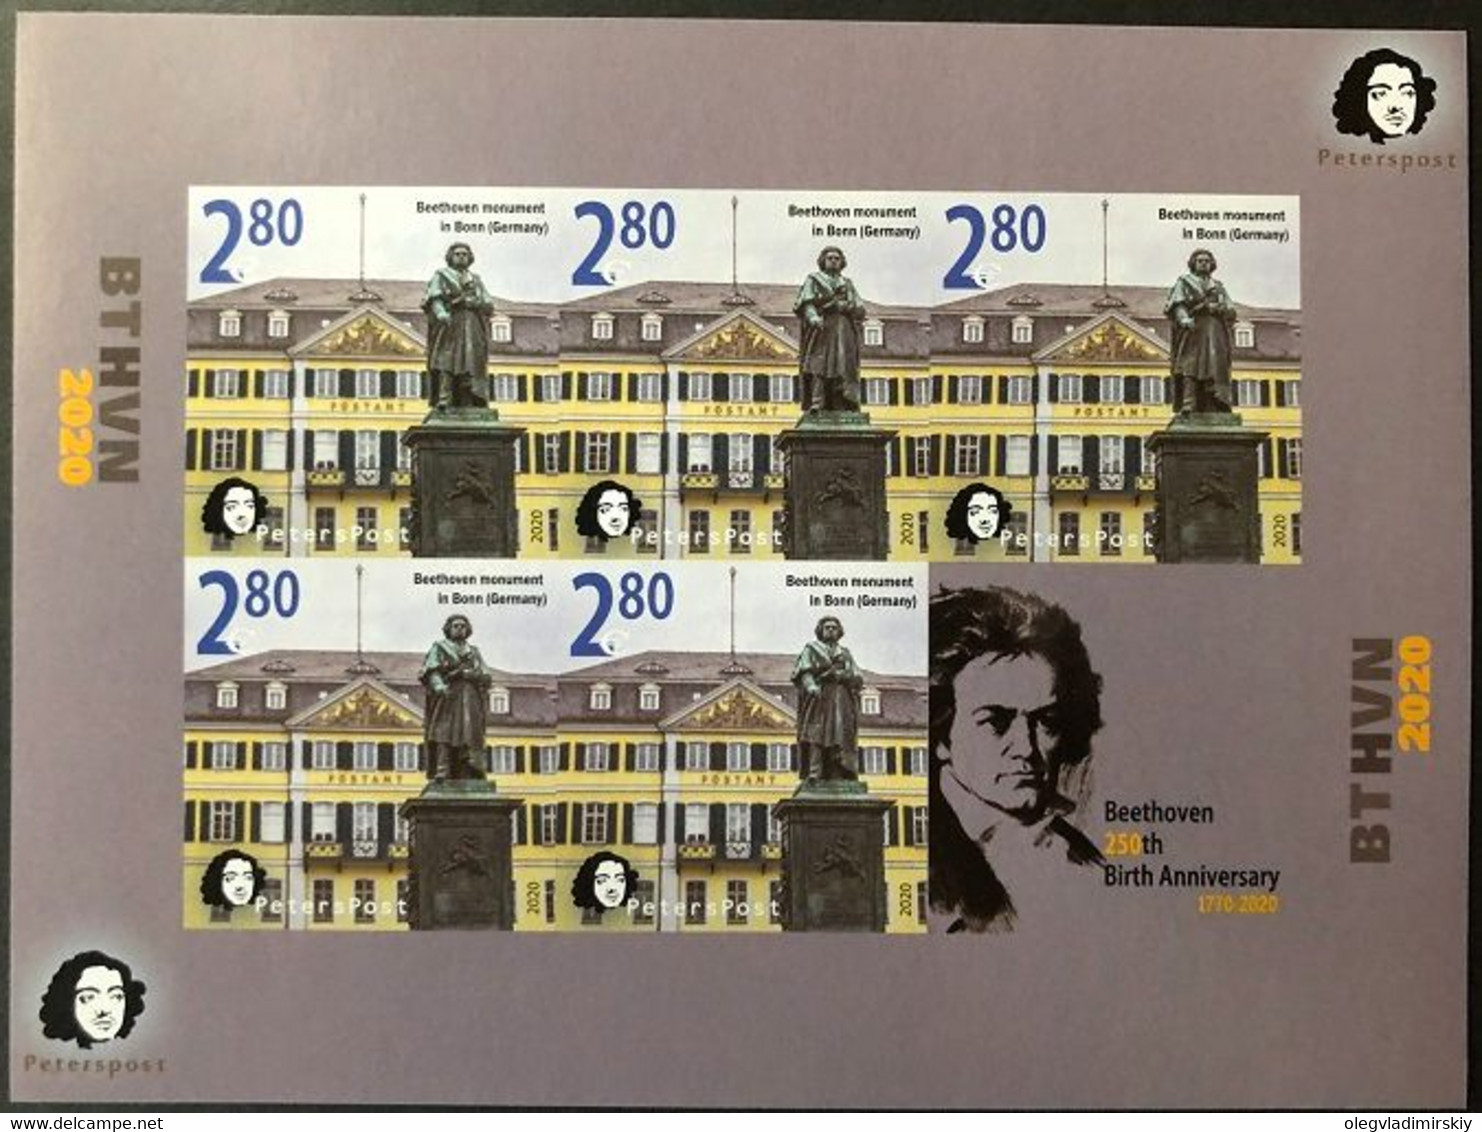 Finland 2020 BTHVN 250 Ann Monument In Bonn (Germany) Peterspost Sheetlet Of 5 Imperforated Stamps And Label Rare - Nuovi